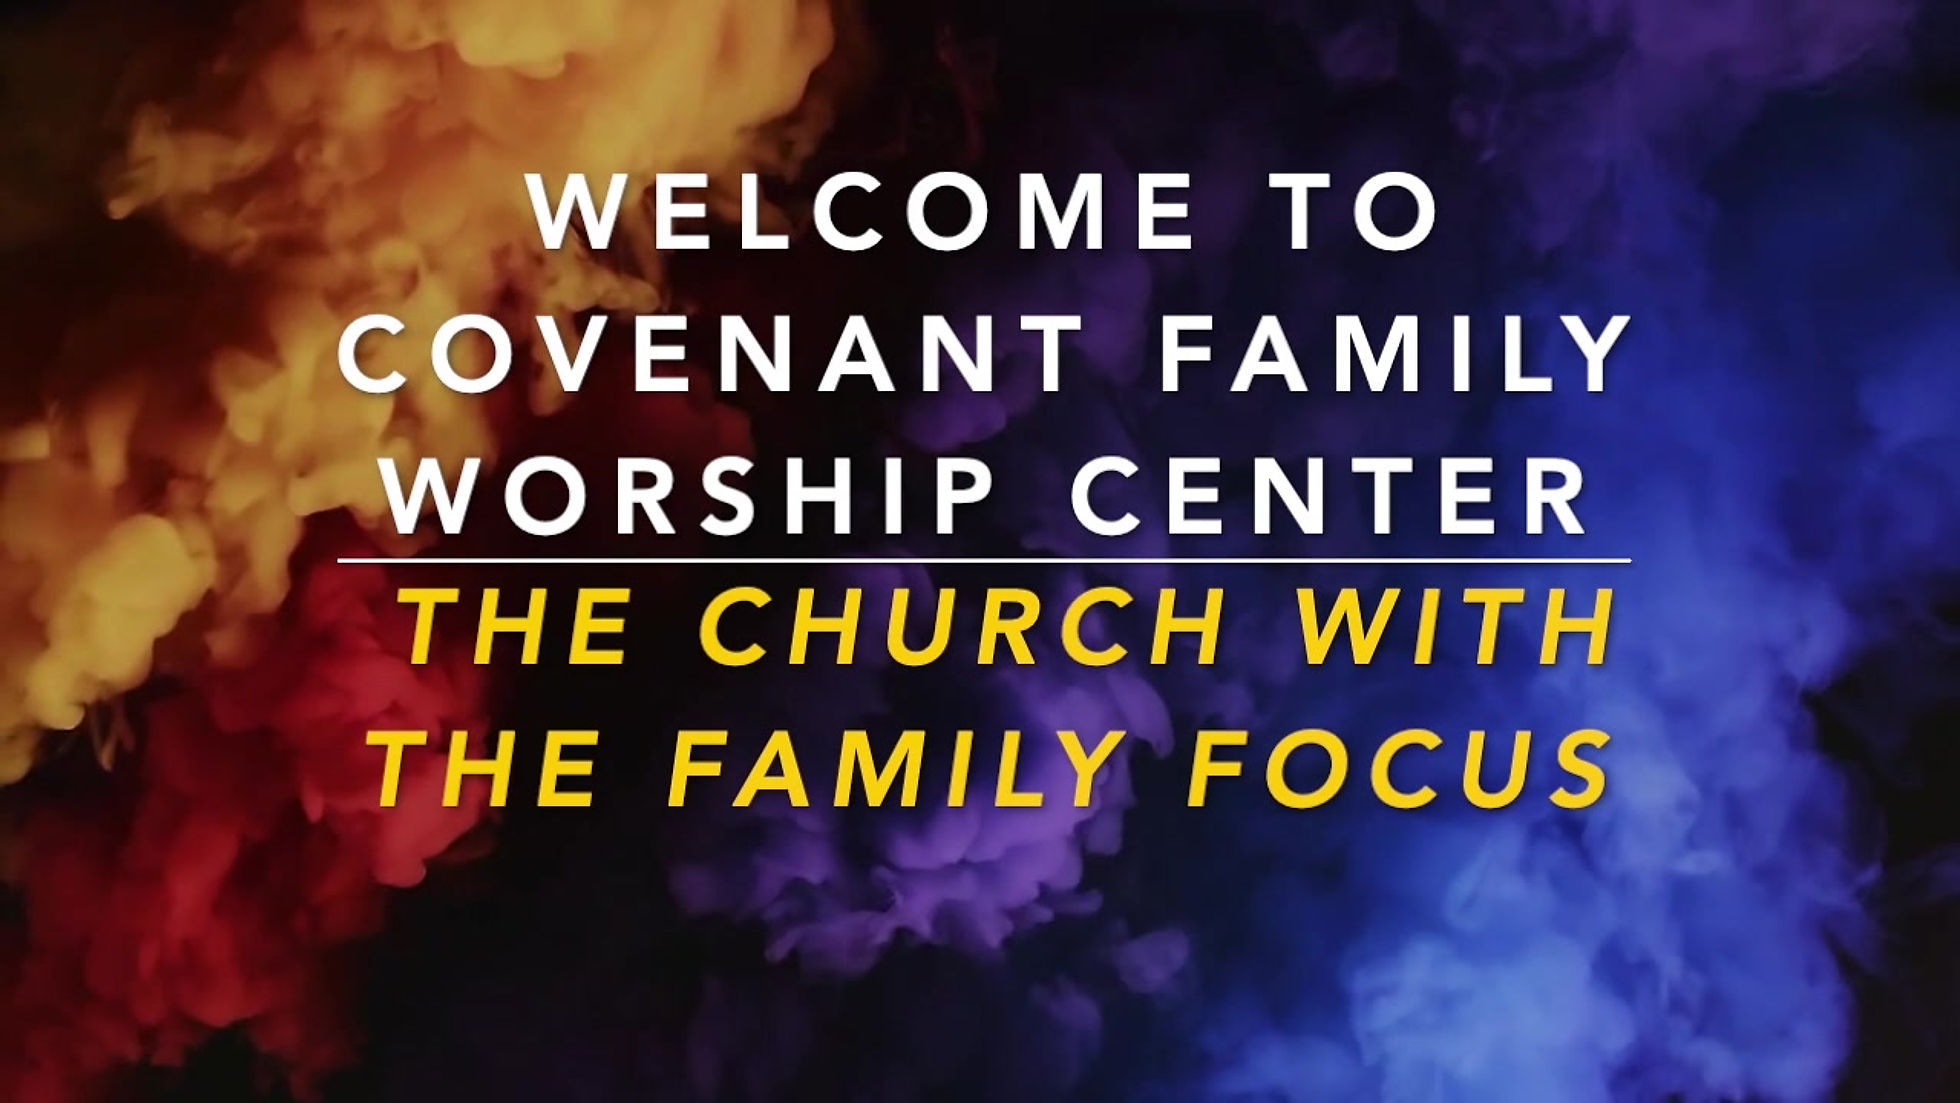 Covenant Family Worship Center Welcome Message